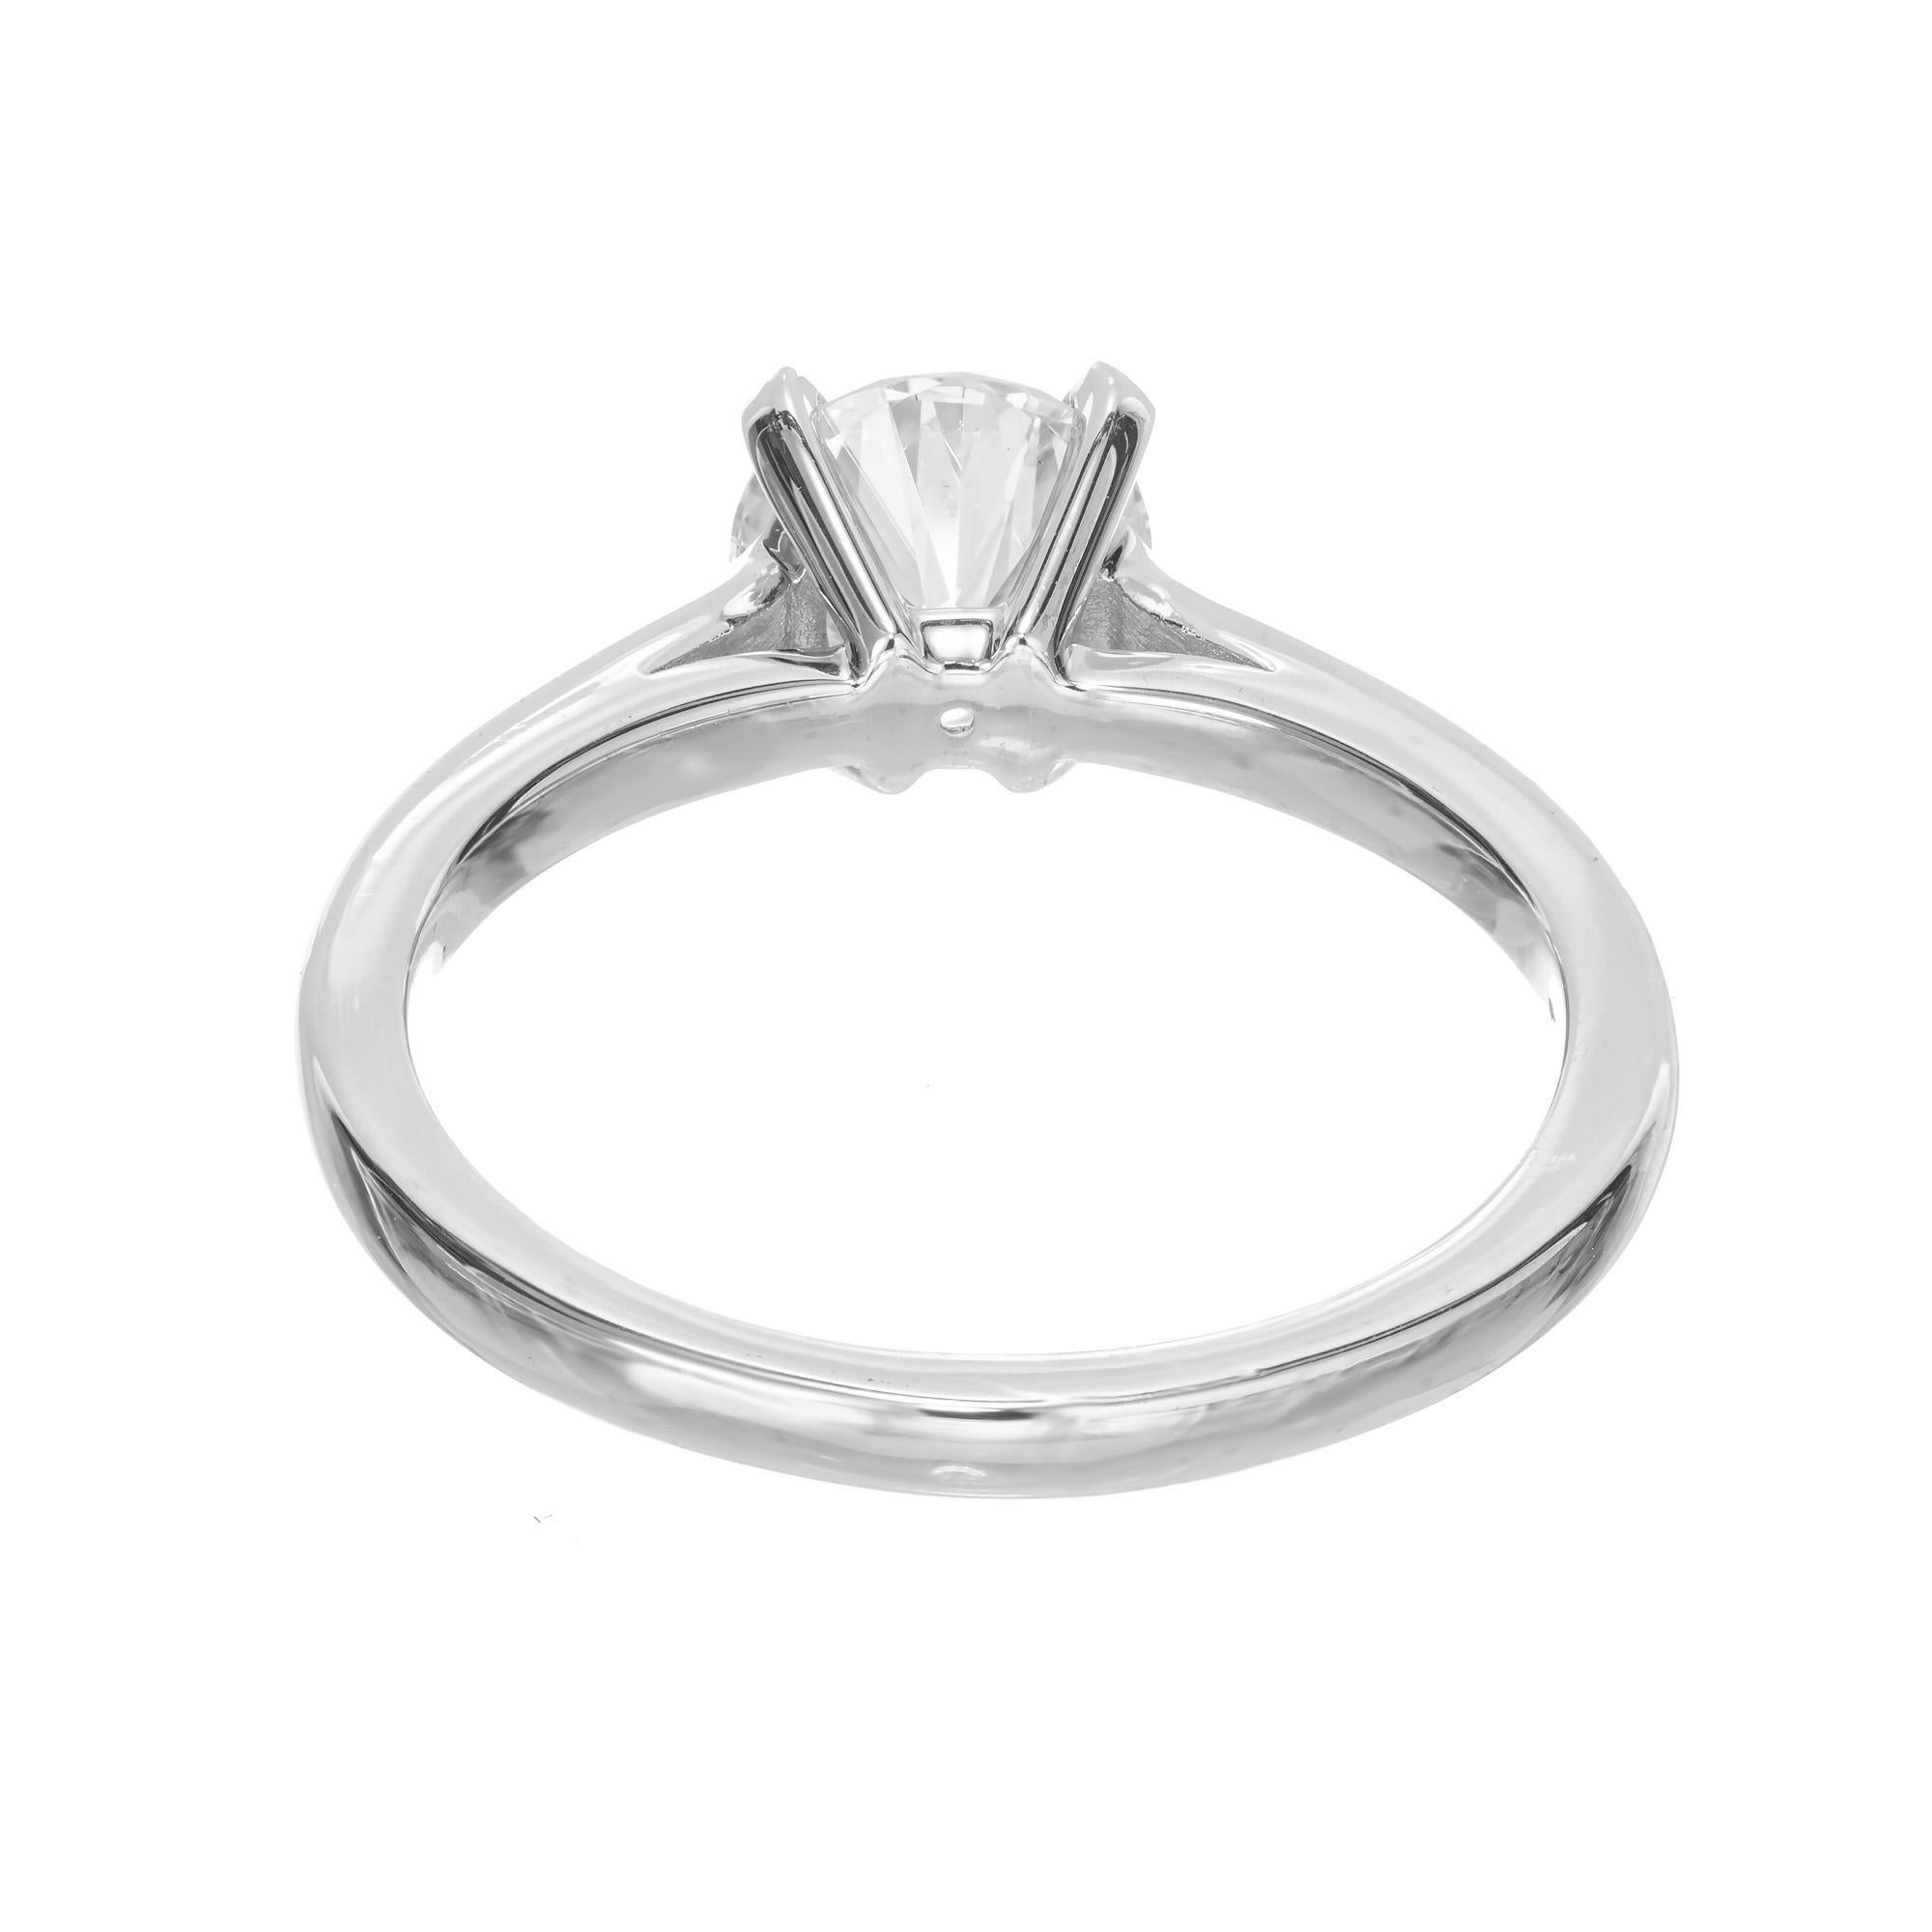 Peter Suchy GIA 1.02 Carat Round Diamond Platinum Solitaire Engagement Ring In New Condition For Sale In Stamford, CT